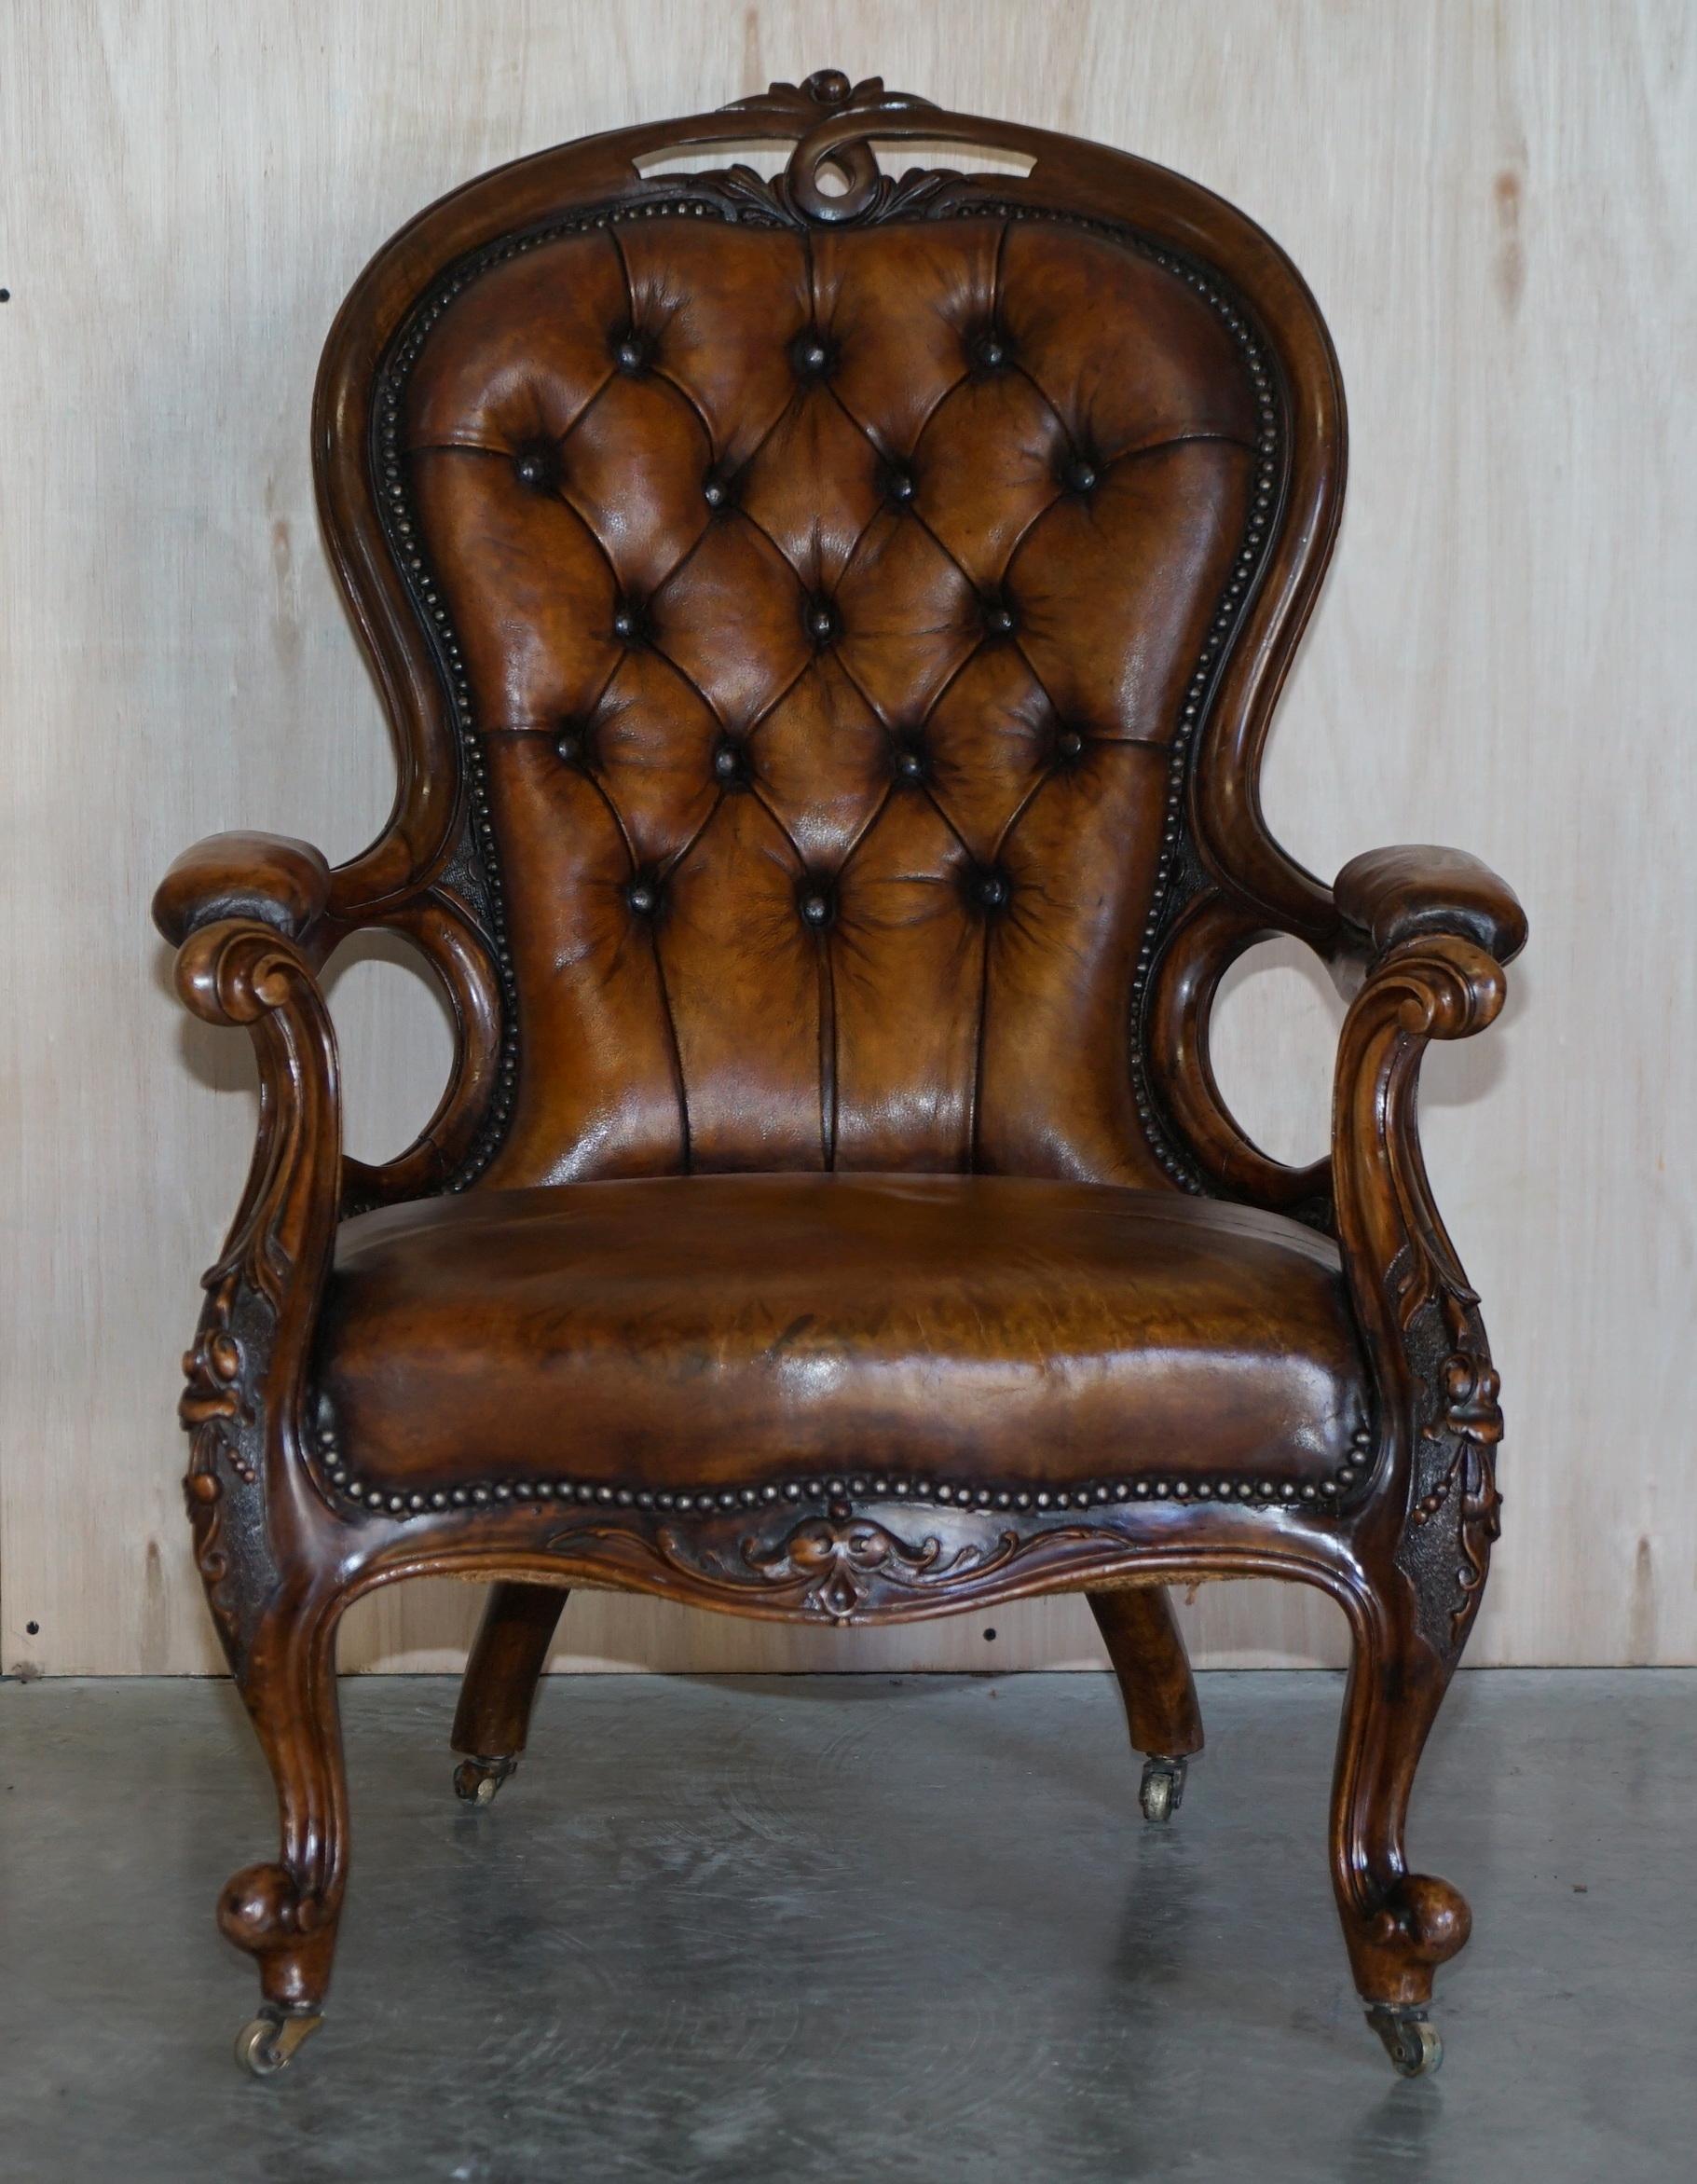 We are delighted to offer for sale this rare fully restored circa 1860 Show framed Chesterfield tufted hand dyed brown leather library reading chair.

This chair is really quite exquisite, its what’s called a show frame, cabinet makers would craft